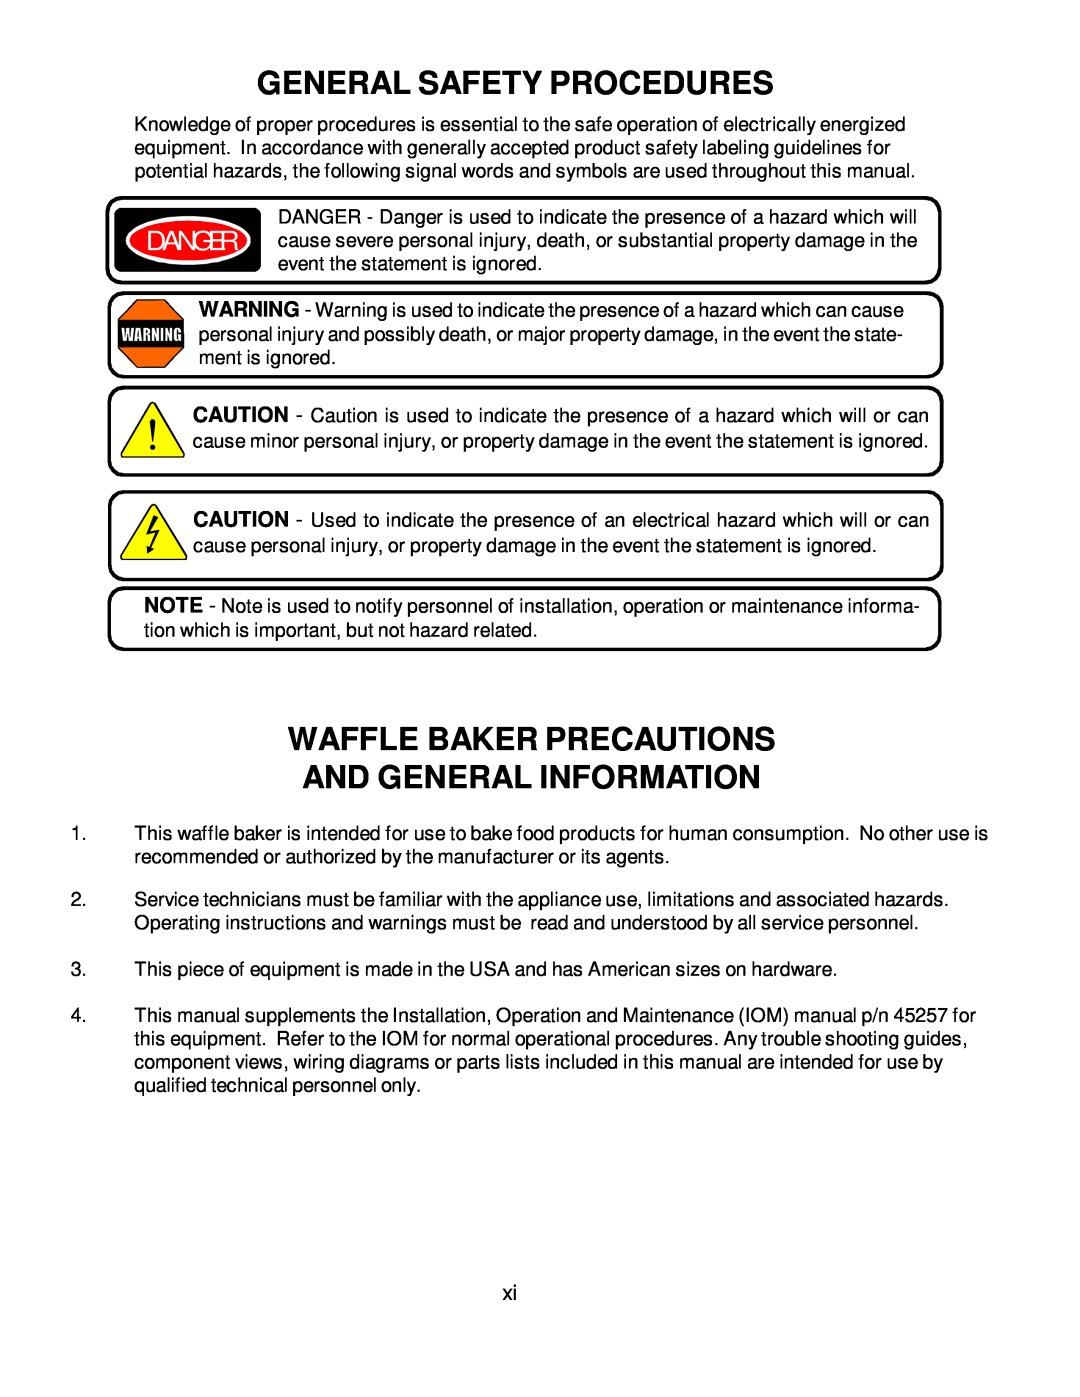 Wells BWB-1S manual General Safety Procedures, Waffle Baker Precautions And General Information 